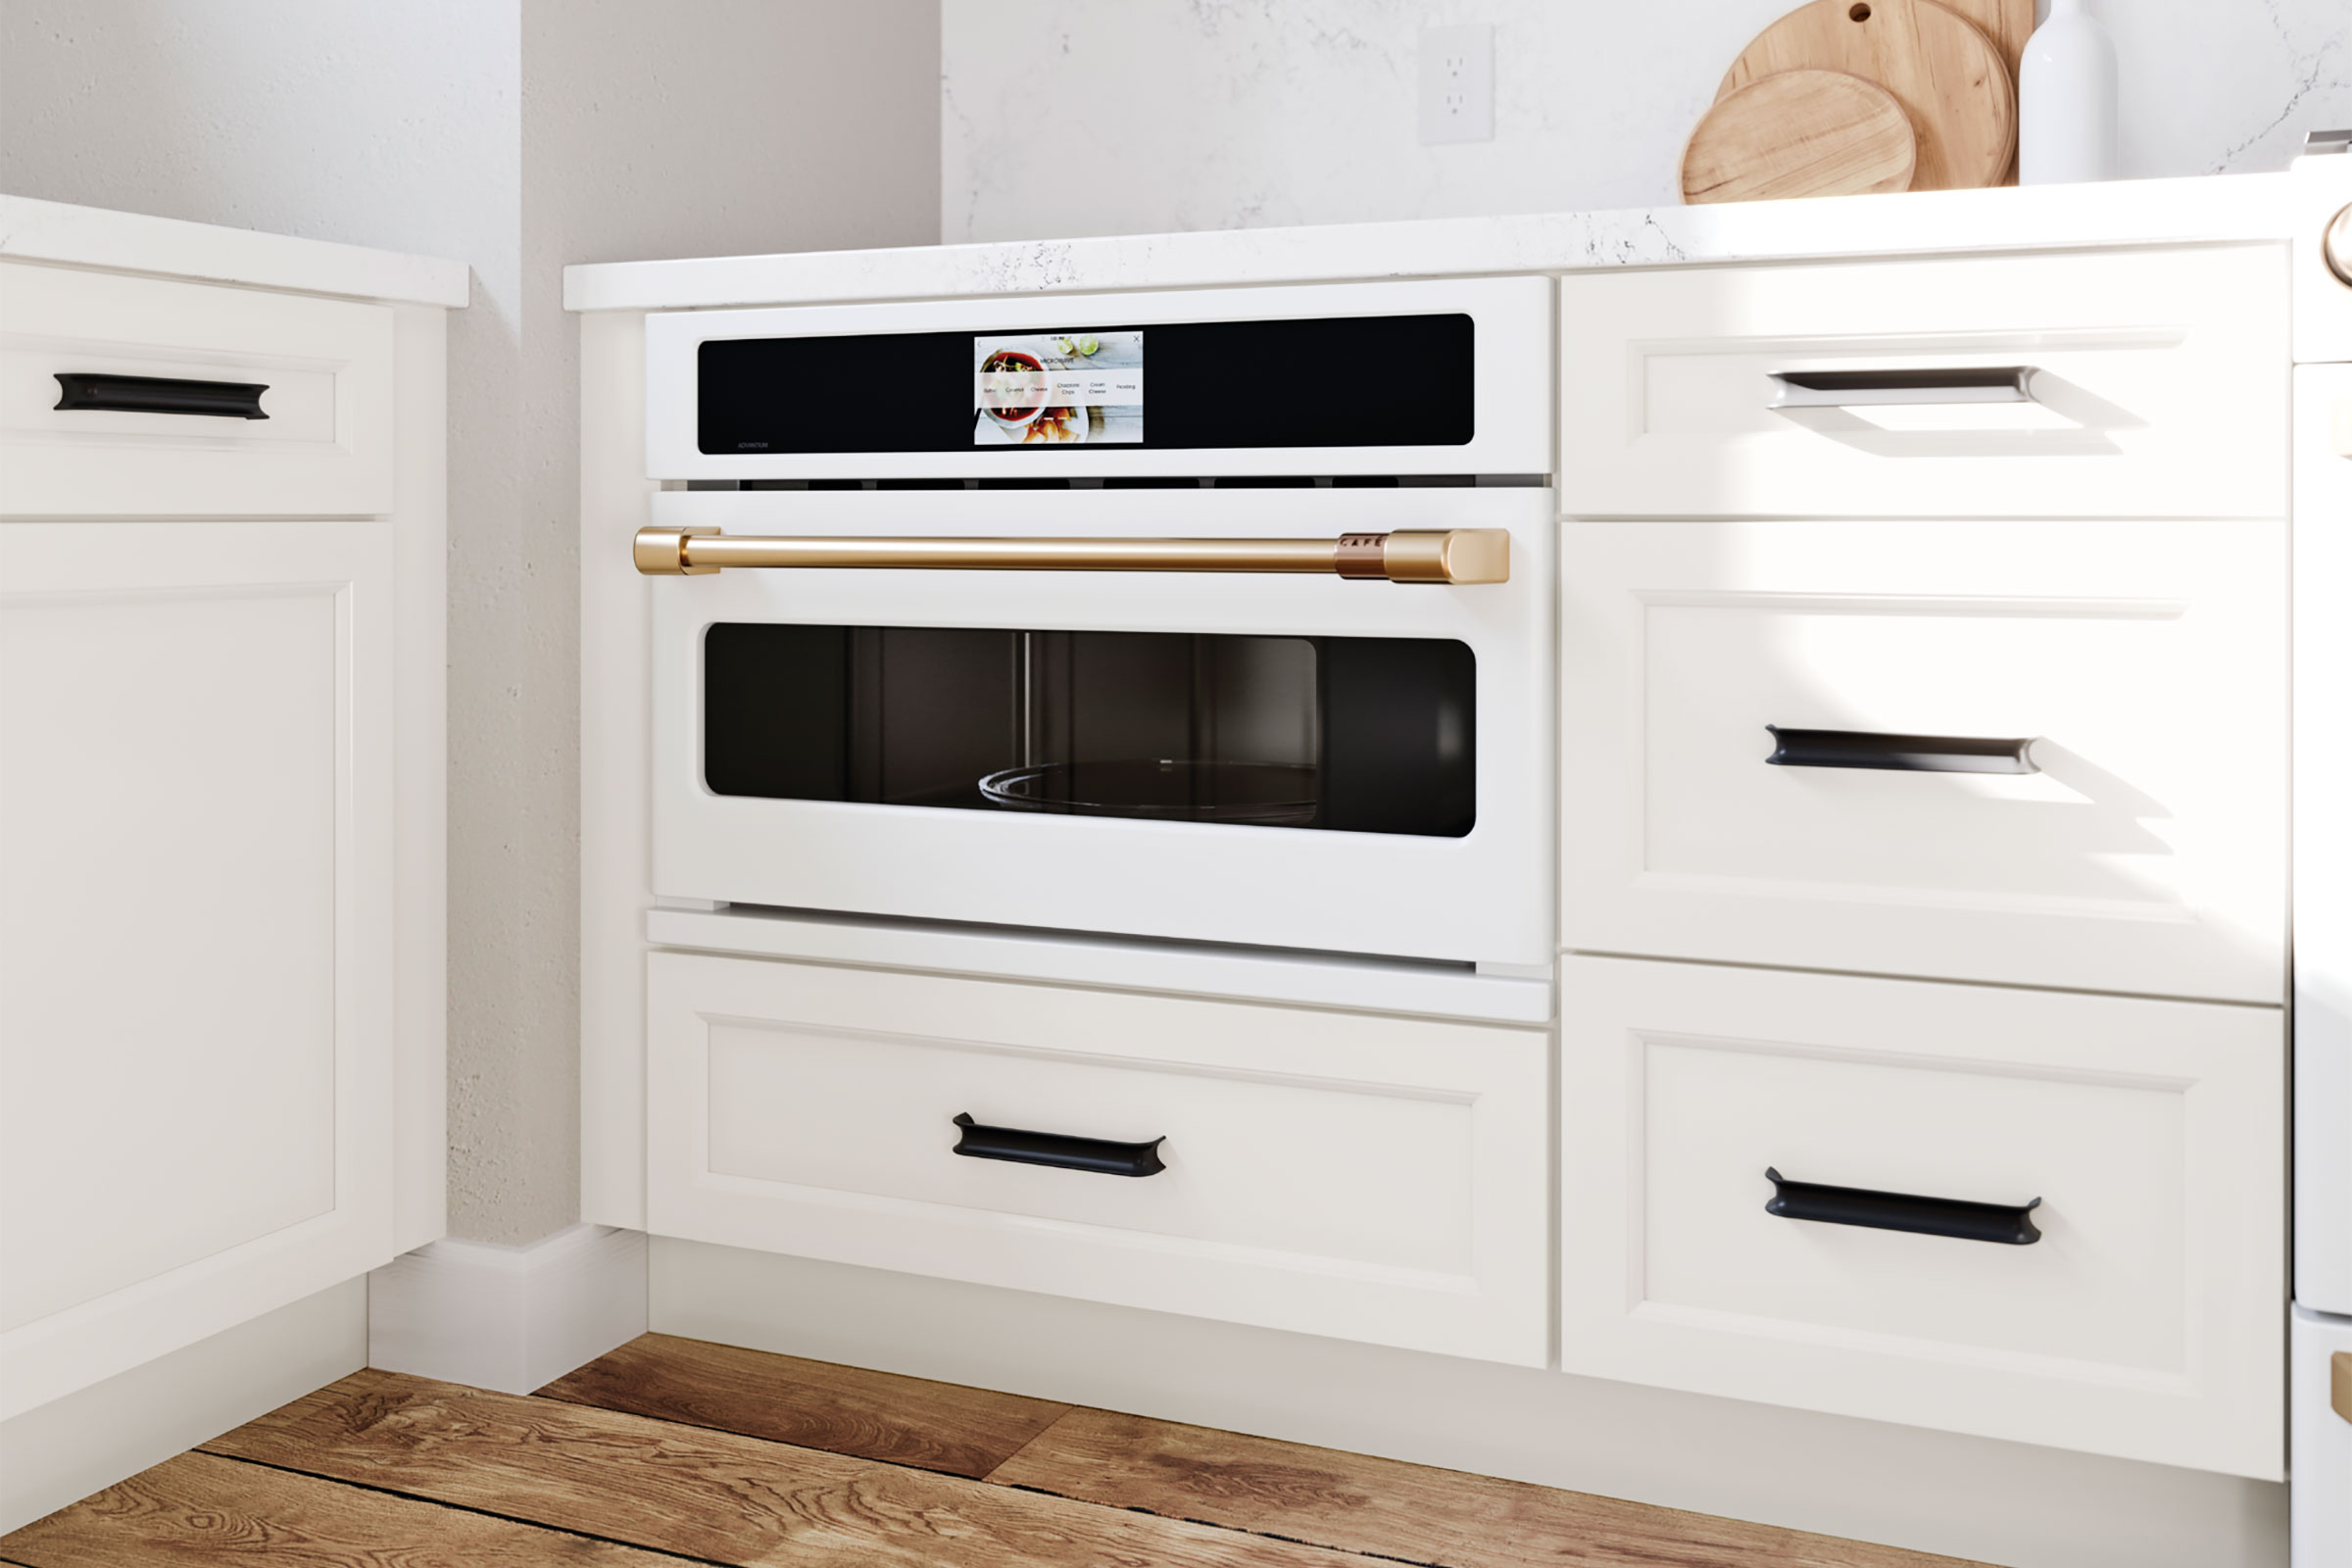 White under-counter oven in KraftMaid base appliance cabinet with Frost White painted doors and black hardware handles 